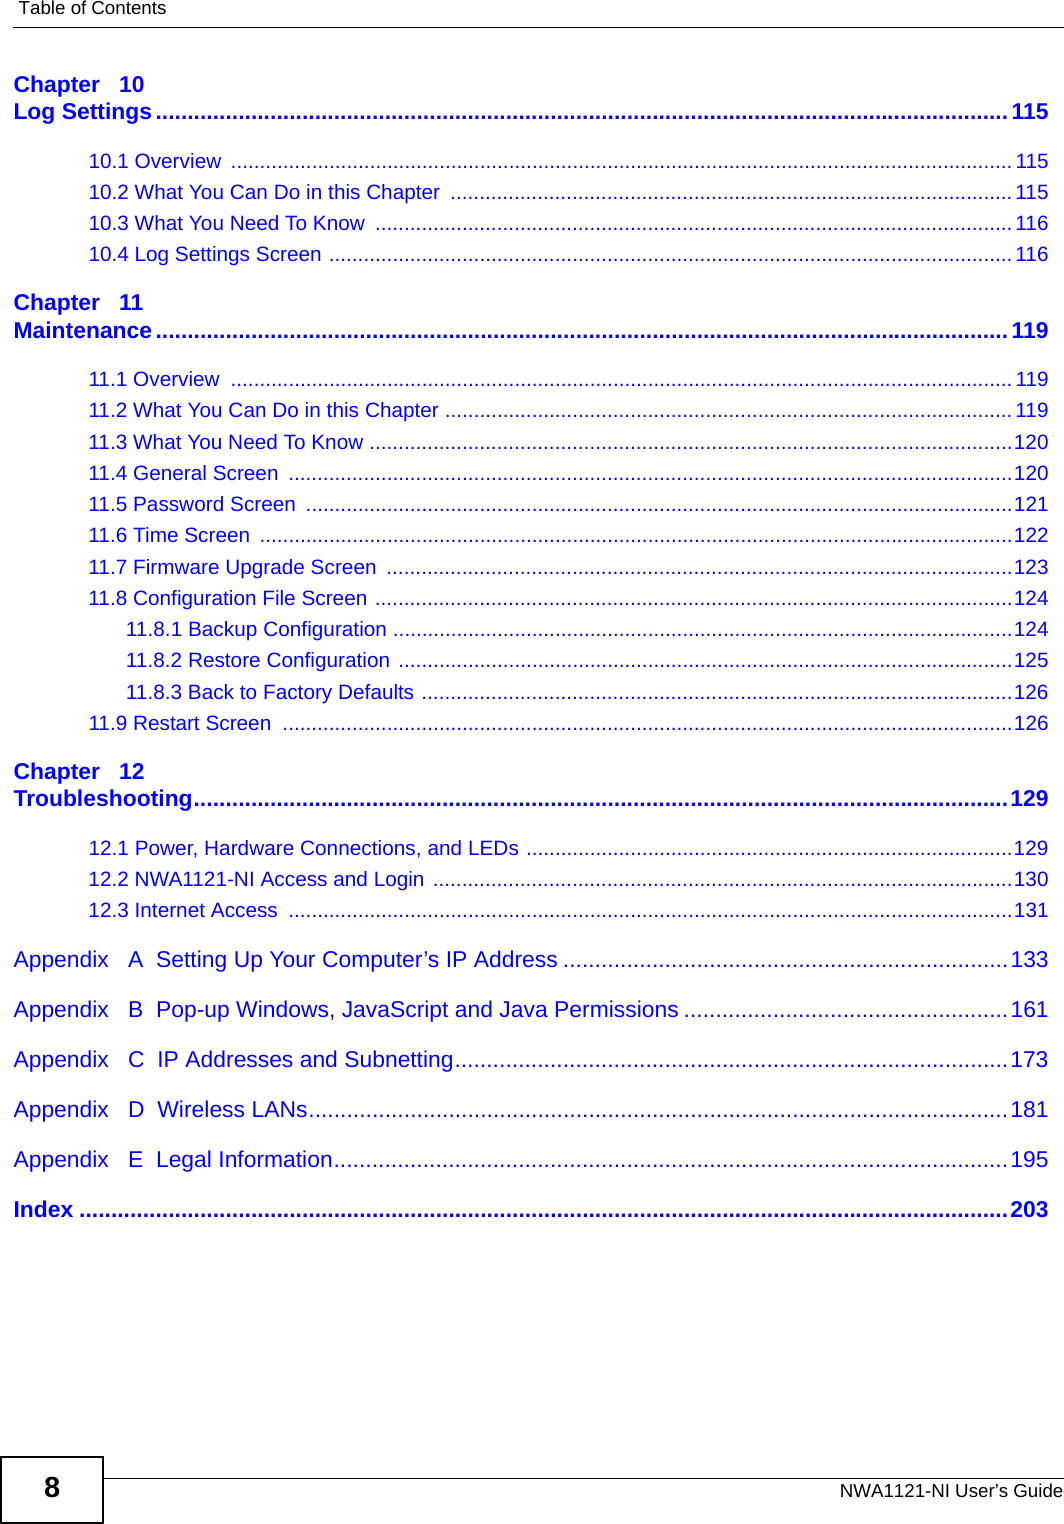 Table of ContentsNWA1121-NI User’s Guide8Chapter   10Log Settings......................................................................................................................................11510.1 Overview  ....................................................................................................................................... 11510.2 What You Can Do in this Chapter  ................................................................................................. 11510.3 What You Need To Know  ..............................................................................................................11610.4 Log Settings Screen ......................................................................................................................116Chapter   11Maintenance......................................................................................................................................11911.1 Overview  .......................................................................................................................................11911.2 What You Can Do in this Chapter ..................................................................................................11911.3 What You Need To Know ...............................................................................................................12011.4 General Screen  .............................................................................................................................12011.5 Password Screen  ..........................................................................................................................12111.6 Time Screen  ..................................................................................................................................12211.7 Firmware Upgrade Screen  ............................................................................................................12311.8 Configuration File Screen ..............................................................................................................12411.8.1 Backup Configuration ...........................................................................................................12411.8.2 Restore Configuration ..........................................................................................................12511.8.3 Back to Factory Defaults ......................................................................................................12611.9 Restart Screen  ..............................................................................................................................126Chapter   12Troubleshooting................................................................................................................................12912.1 Power, Hardware Connections, and LEDs ....................................................................................12912.2 NWA1121-NI Access and Login ....................................................................................................13012.3 Internet Access  .............................................................................................................................131Appendix   A  Setting Up Your Computer’s IP Address ......................................................................133Appendix   B  Pop-up Windows, JavaScript and Java Permissions ...................................................161Appendix   C  IP Addresses and Subnetting.......................................................................................173Appendix   D  Wireless LANs..............................................................................................................181Appendix   E  Legal Information..........................................................................................................195Index ..................................................................................................................................................203